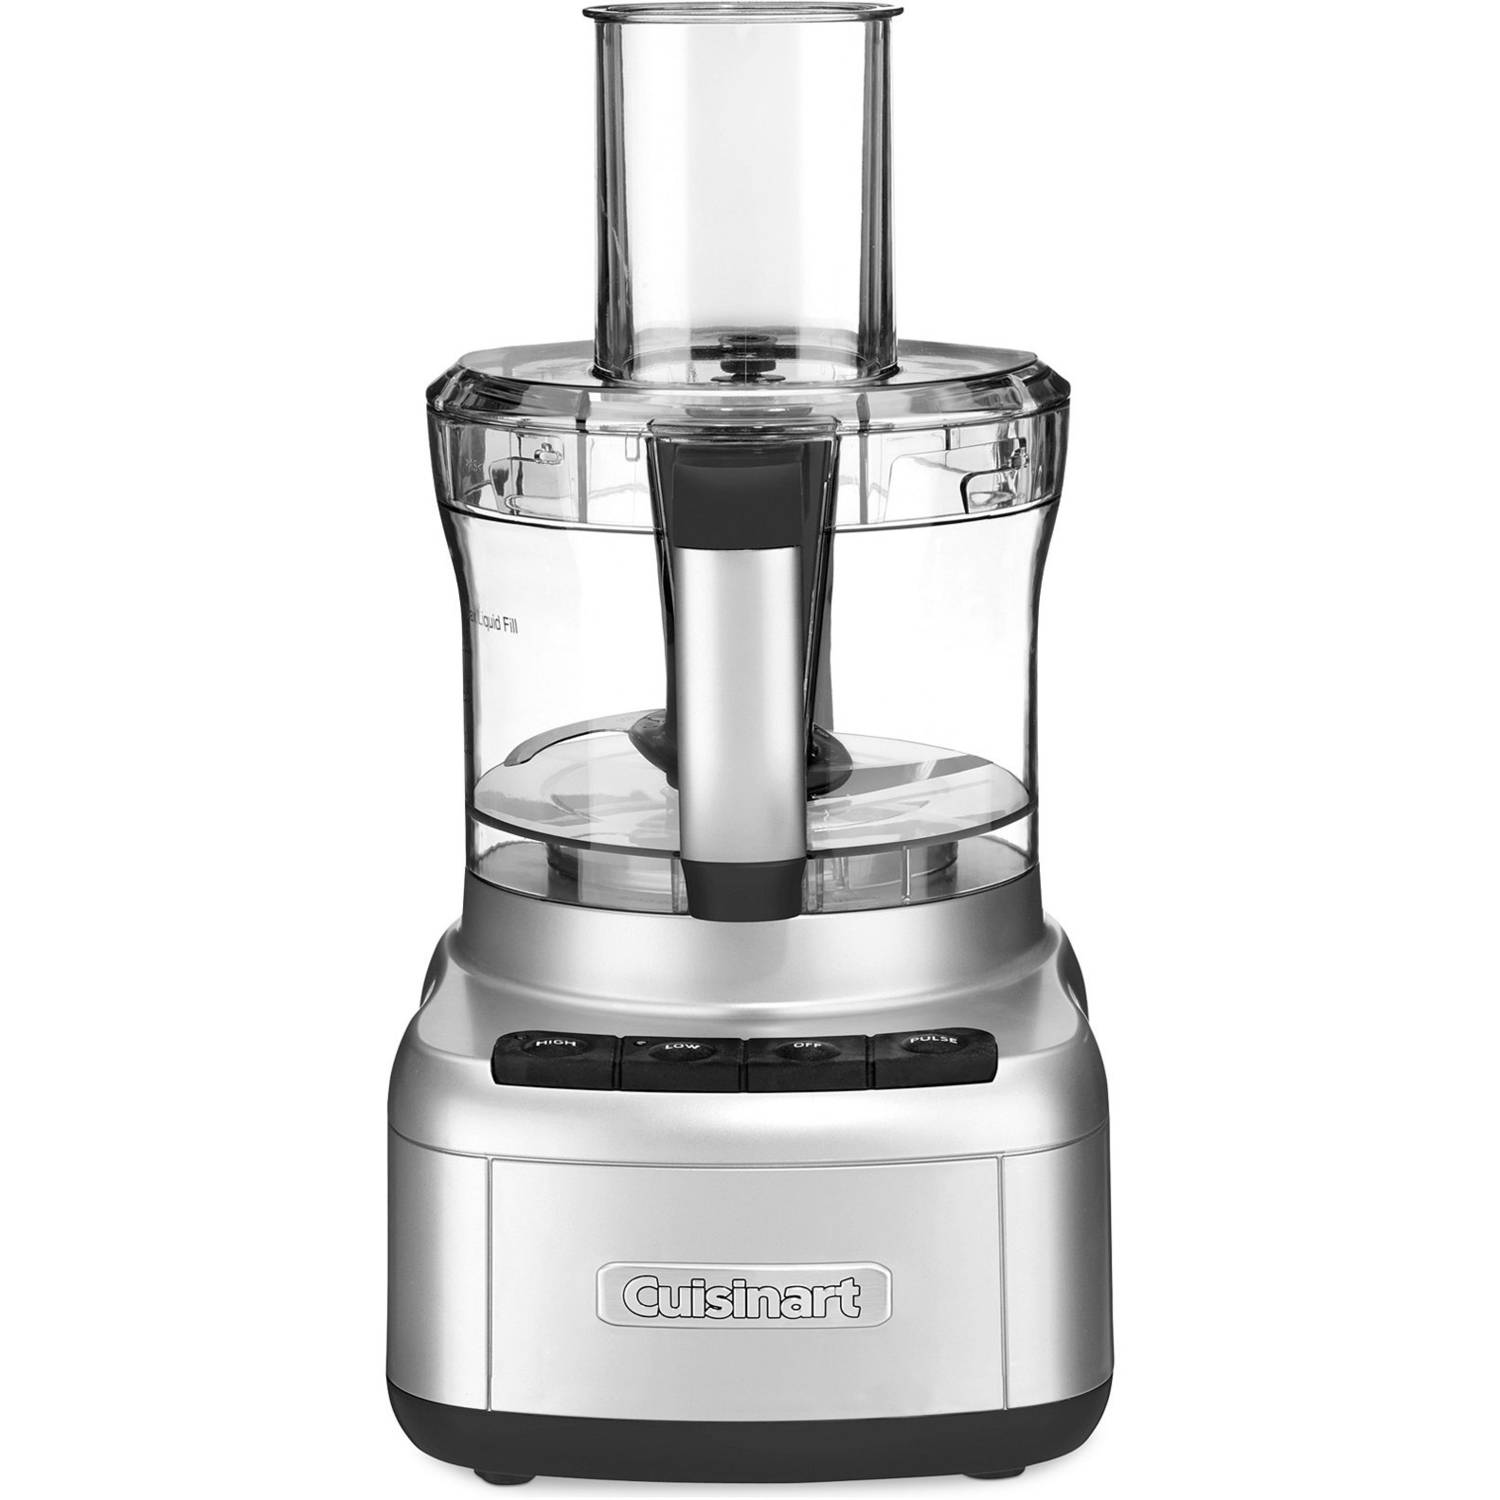 Cuisinart Elemental 8 Cup Food Processor, Silver (FP-8SV) - image 1 of 2